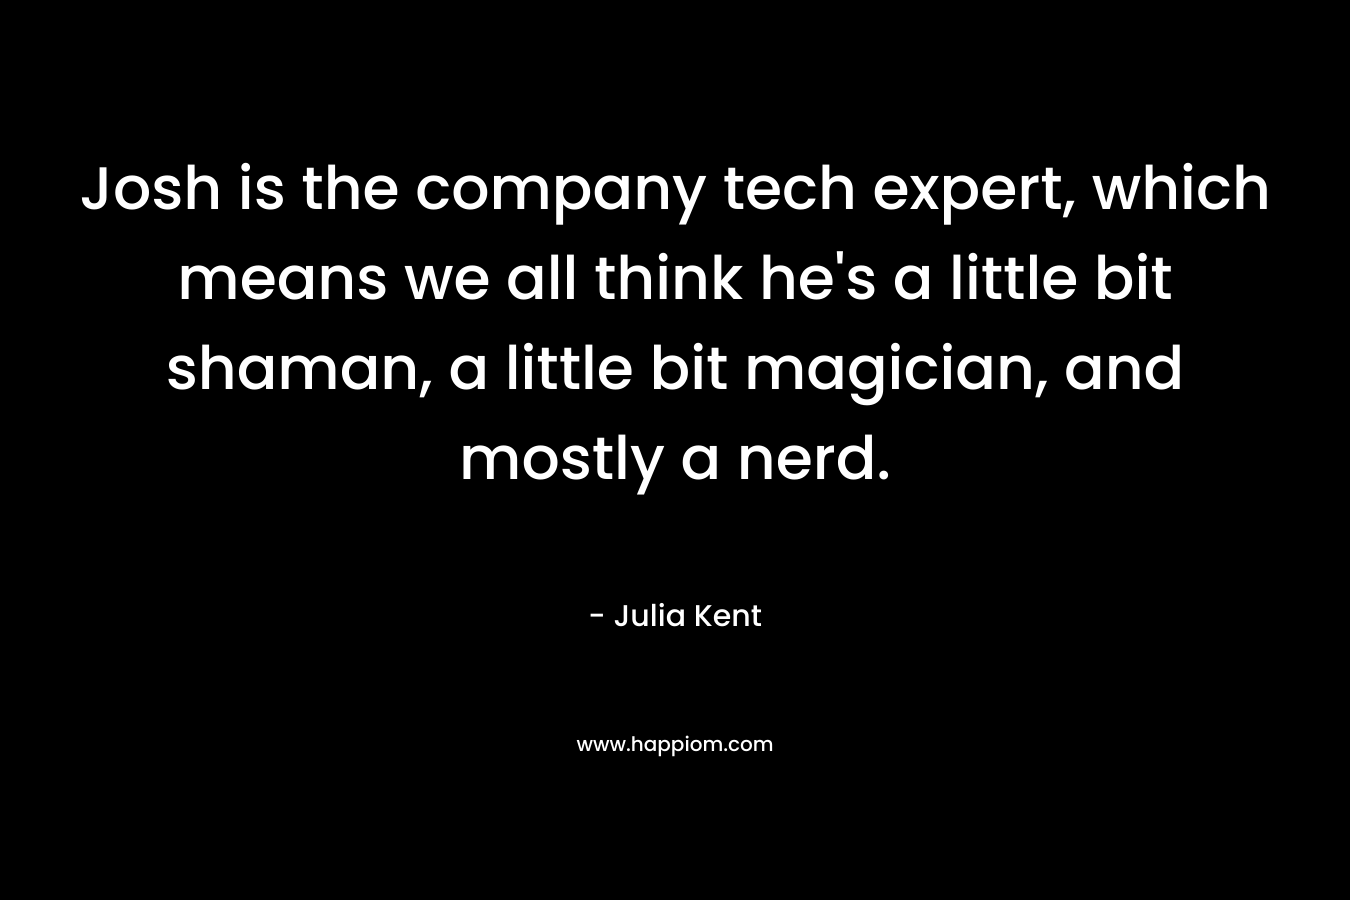 Josh is the company tech expert, which means we all think he’s a little bit shaman, a little bit magician, and mostly a nerd. – Julia Kent